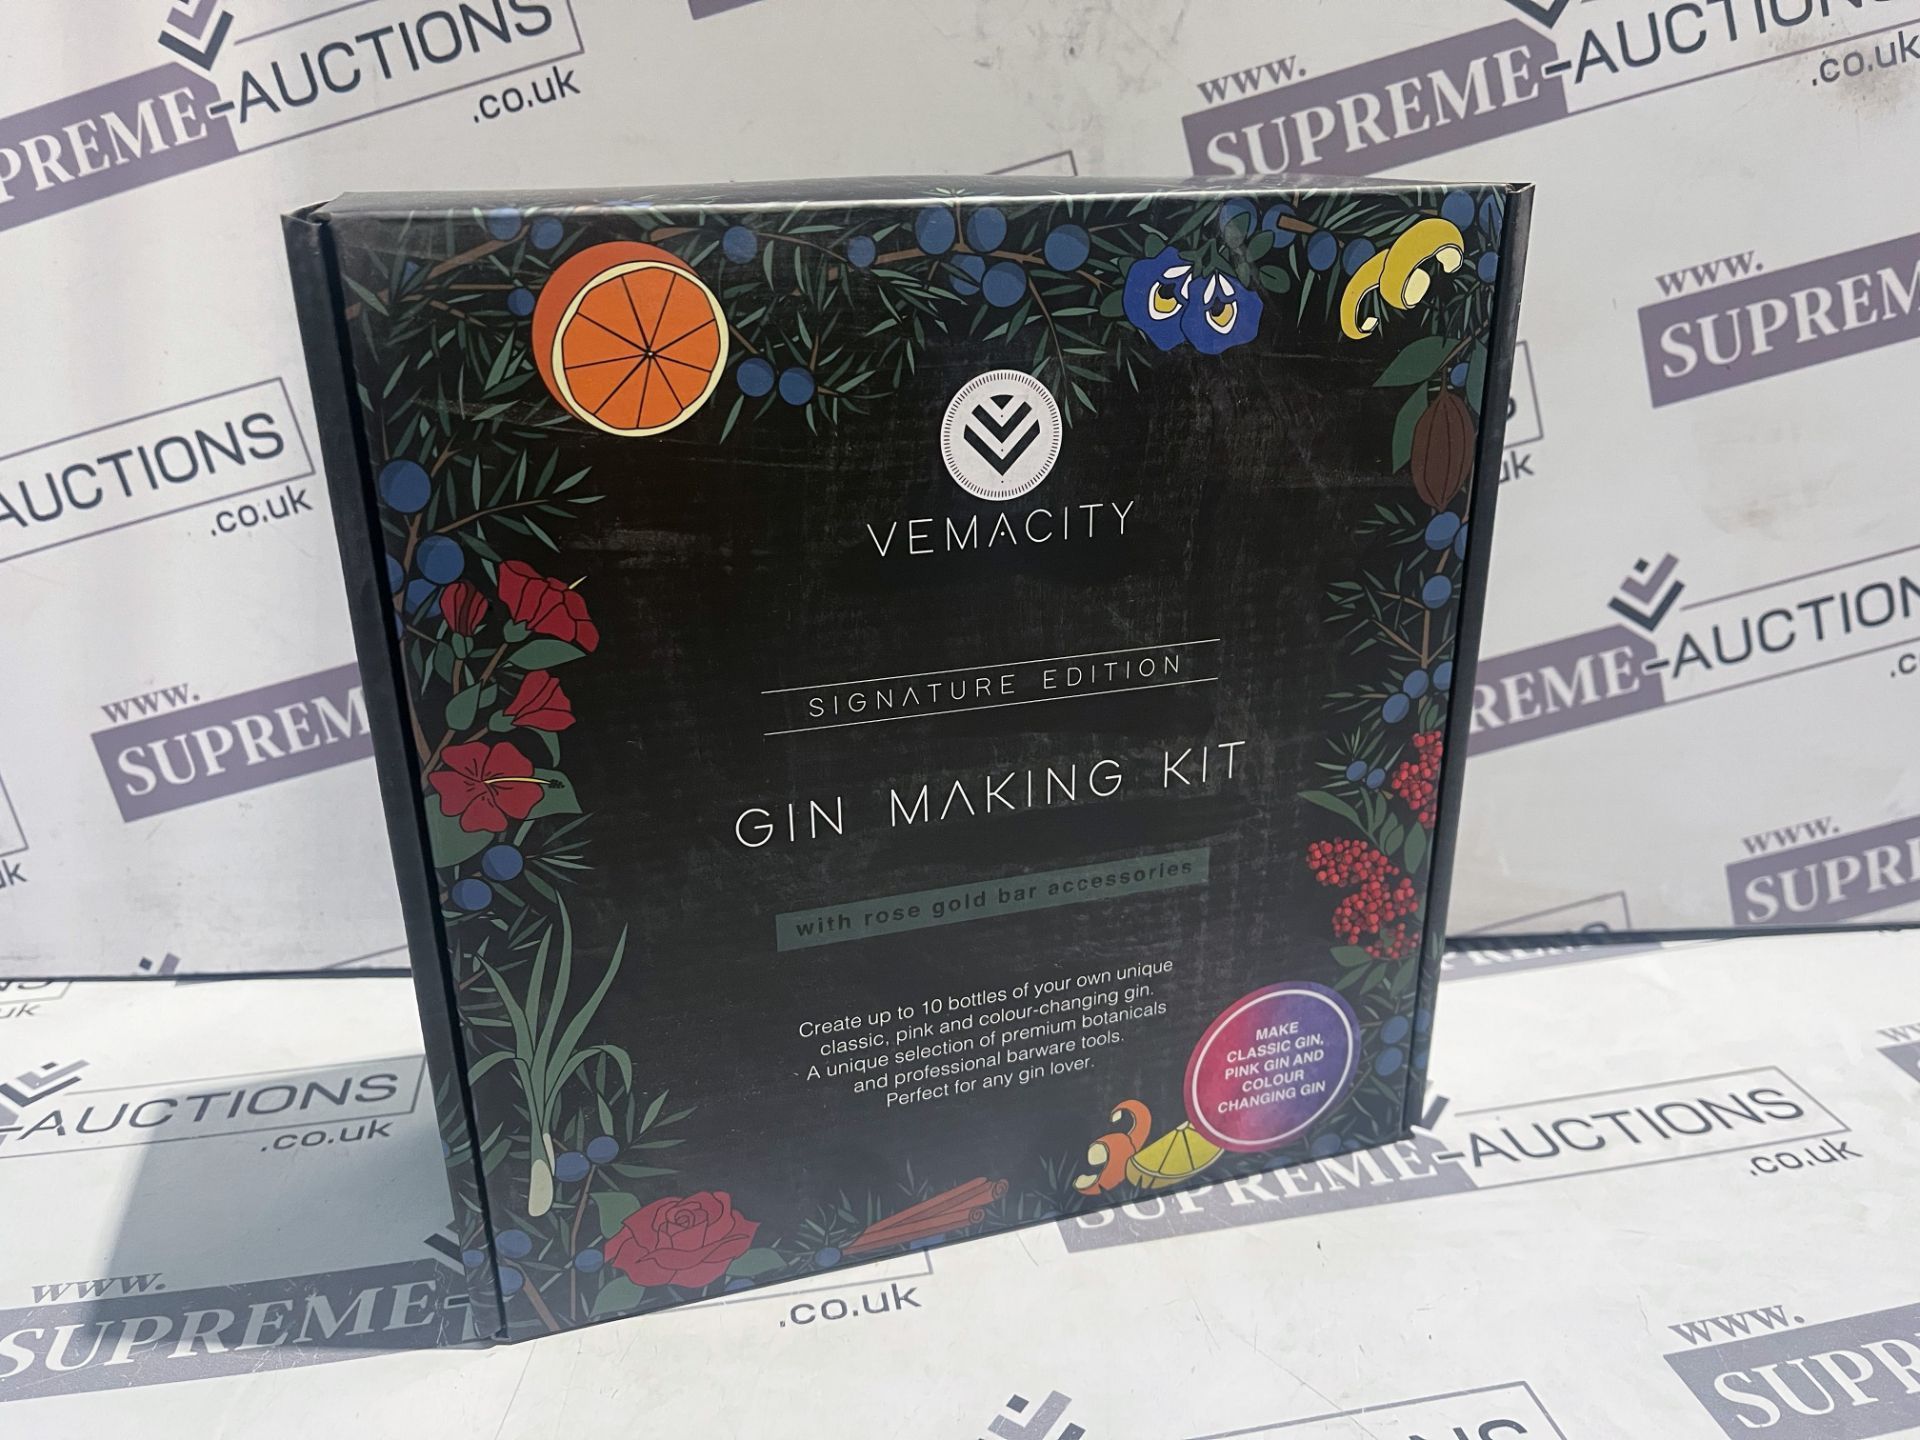 6 X BRAND NEW VEMACITY SIGNATURE EDITION GIN MAKING KITS WITH ROSE GOLD BAR ACCESSORIES RRP £40 EACH